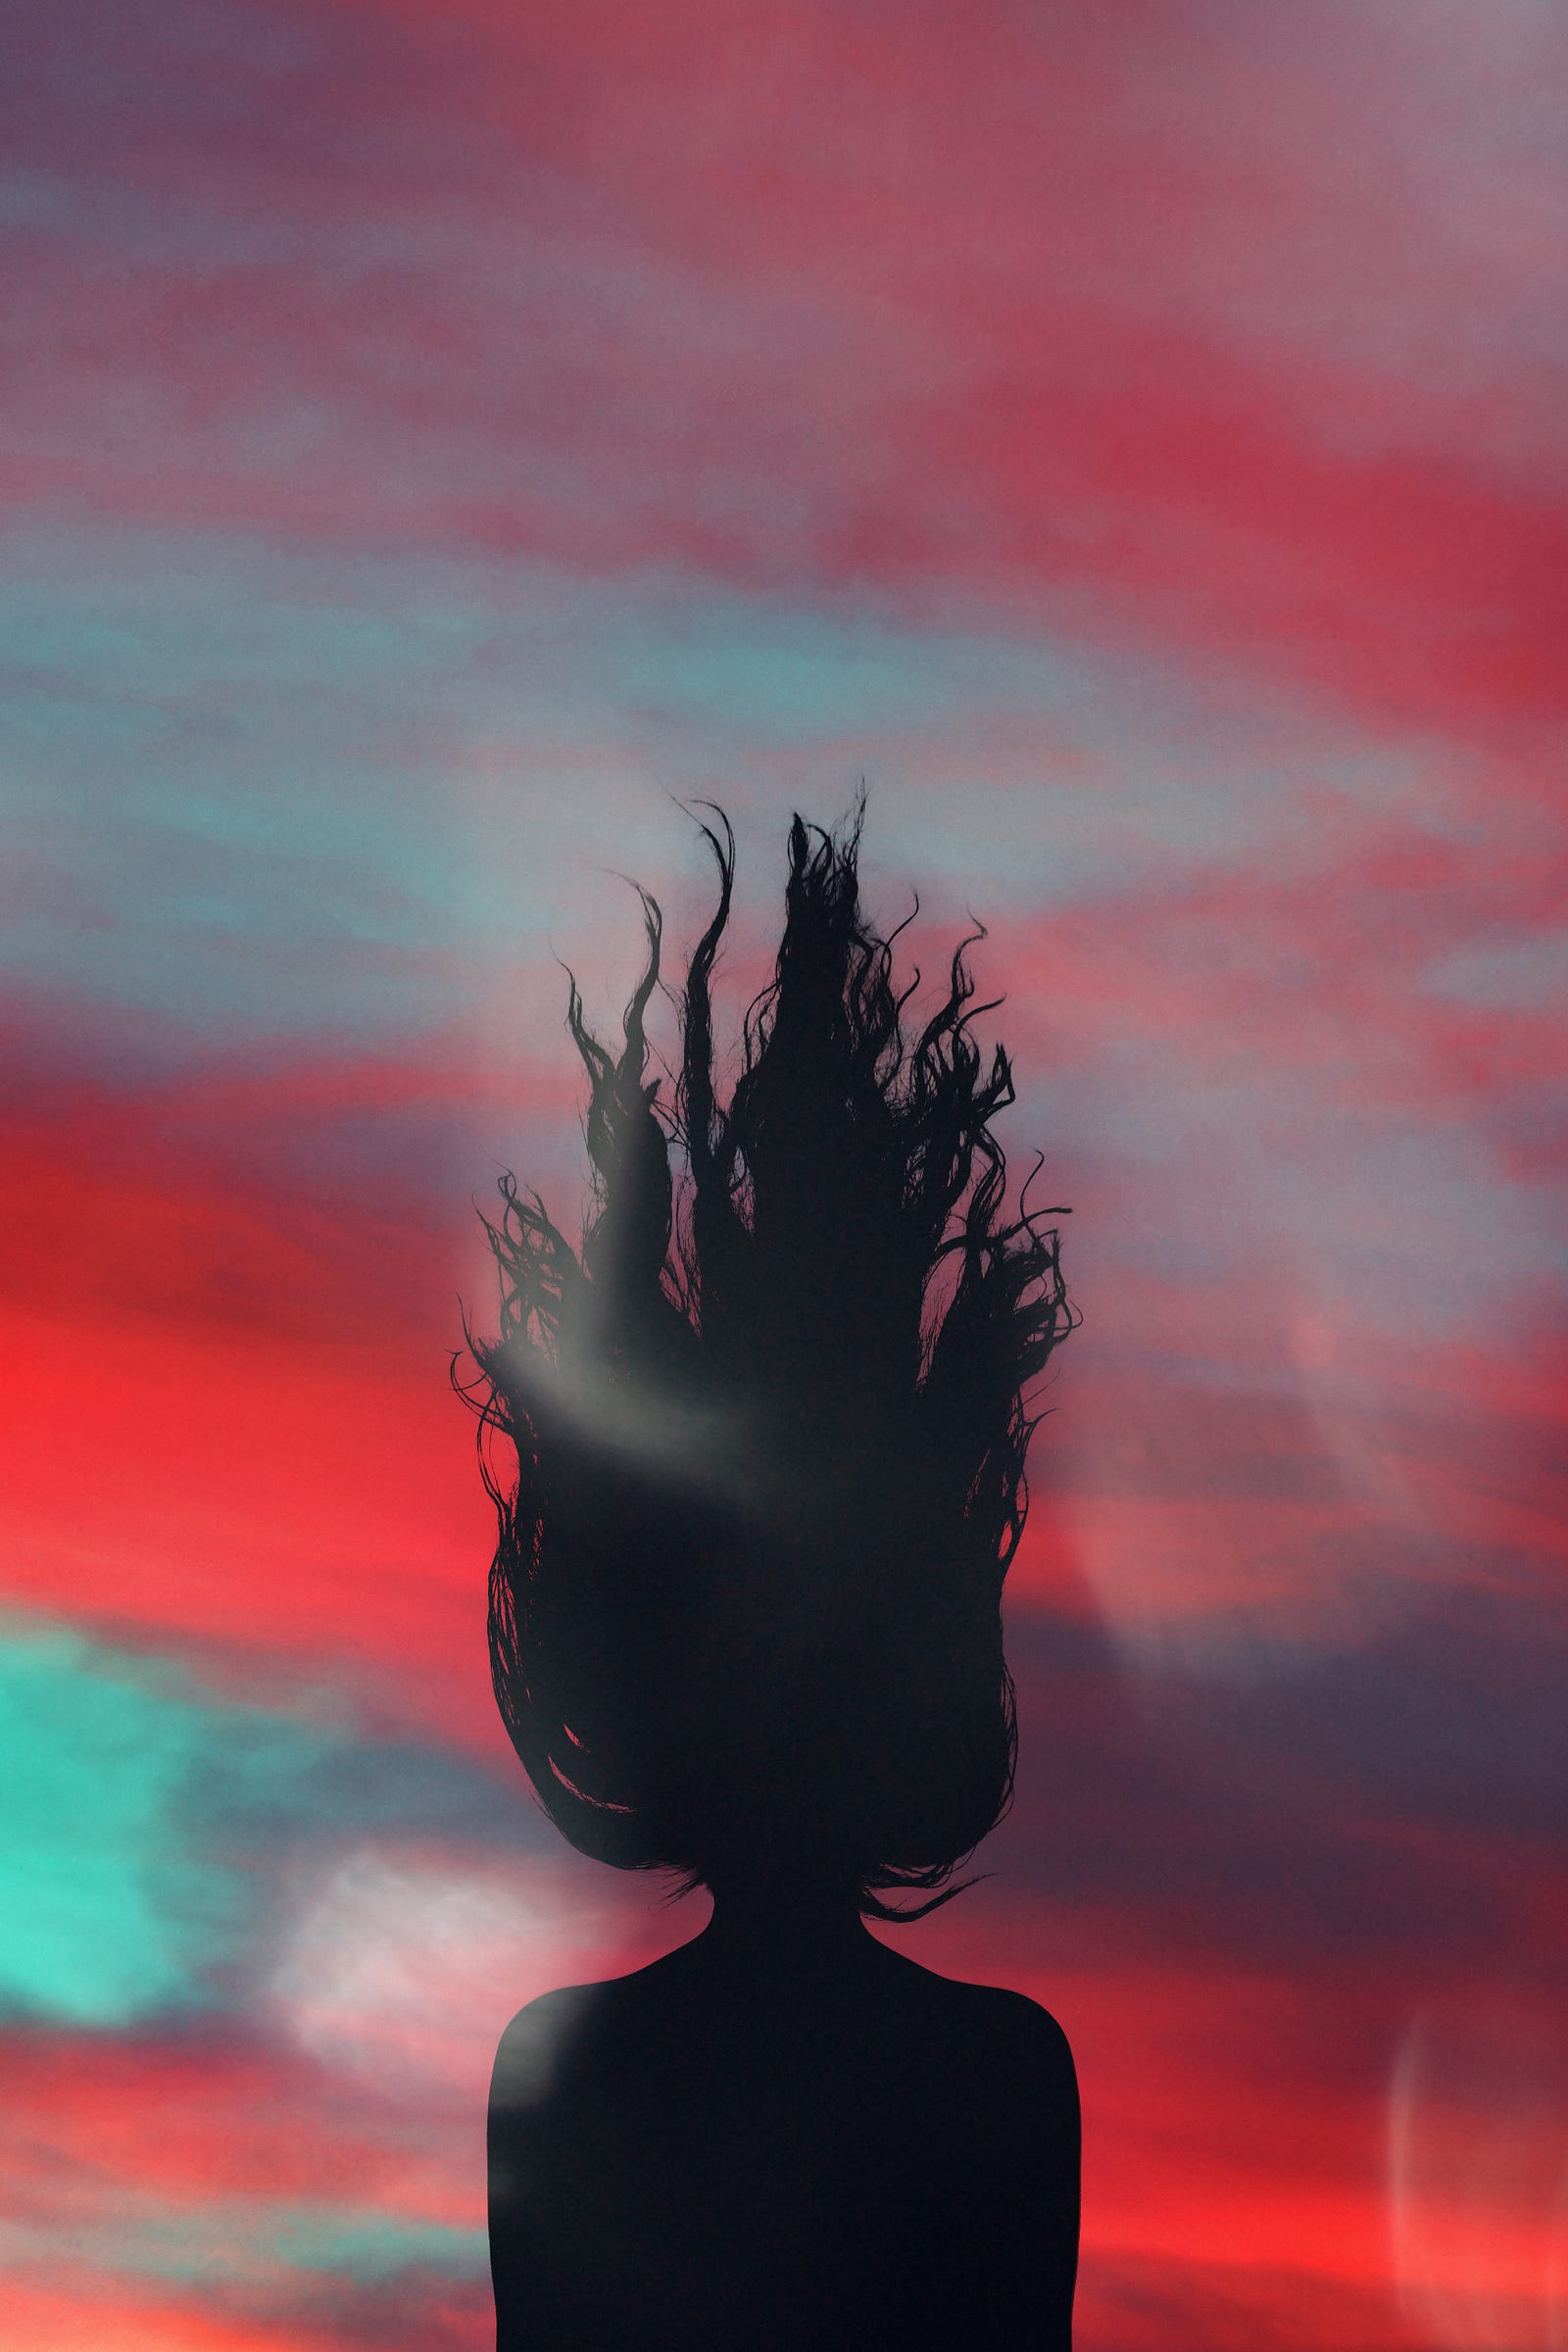 Illustration of a woman with her hair, flowing against gravity, rising to the sky. A fiery sunset-lit sky is behind her.